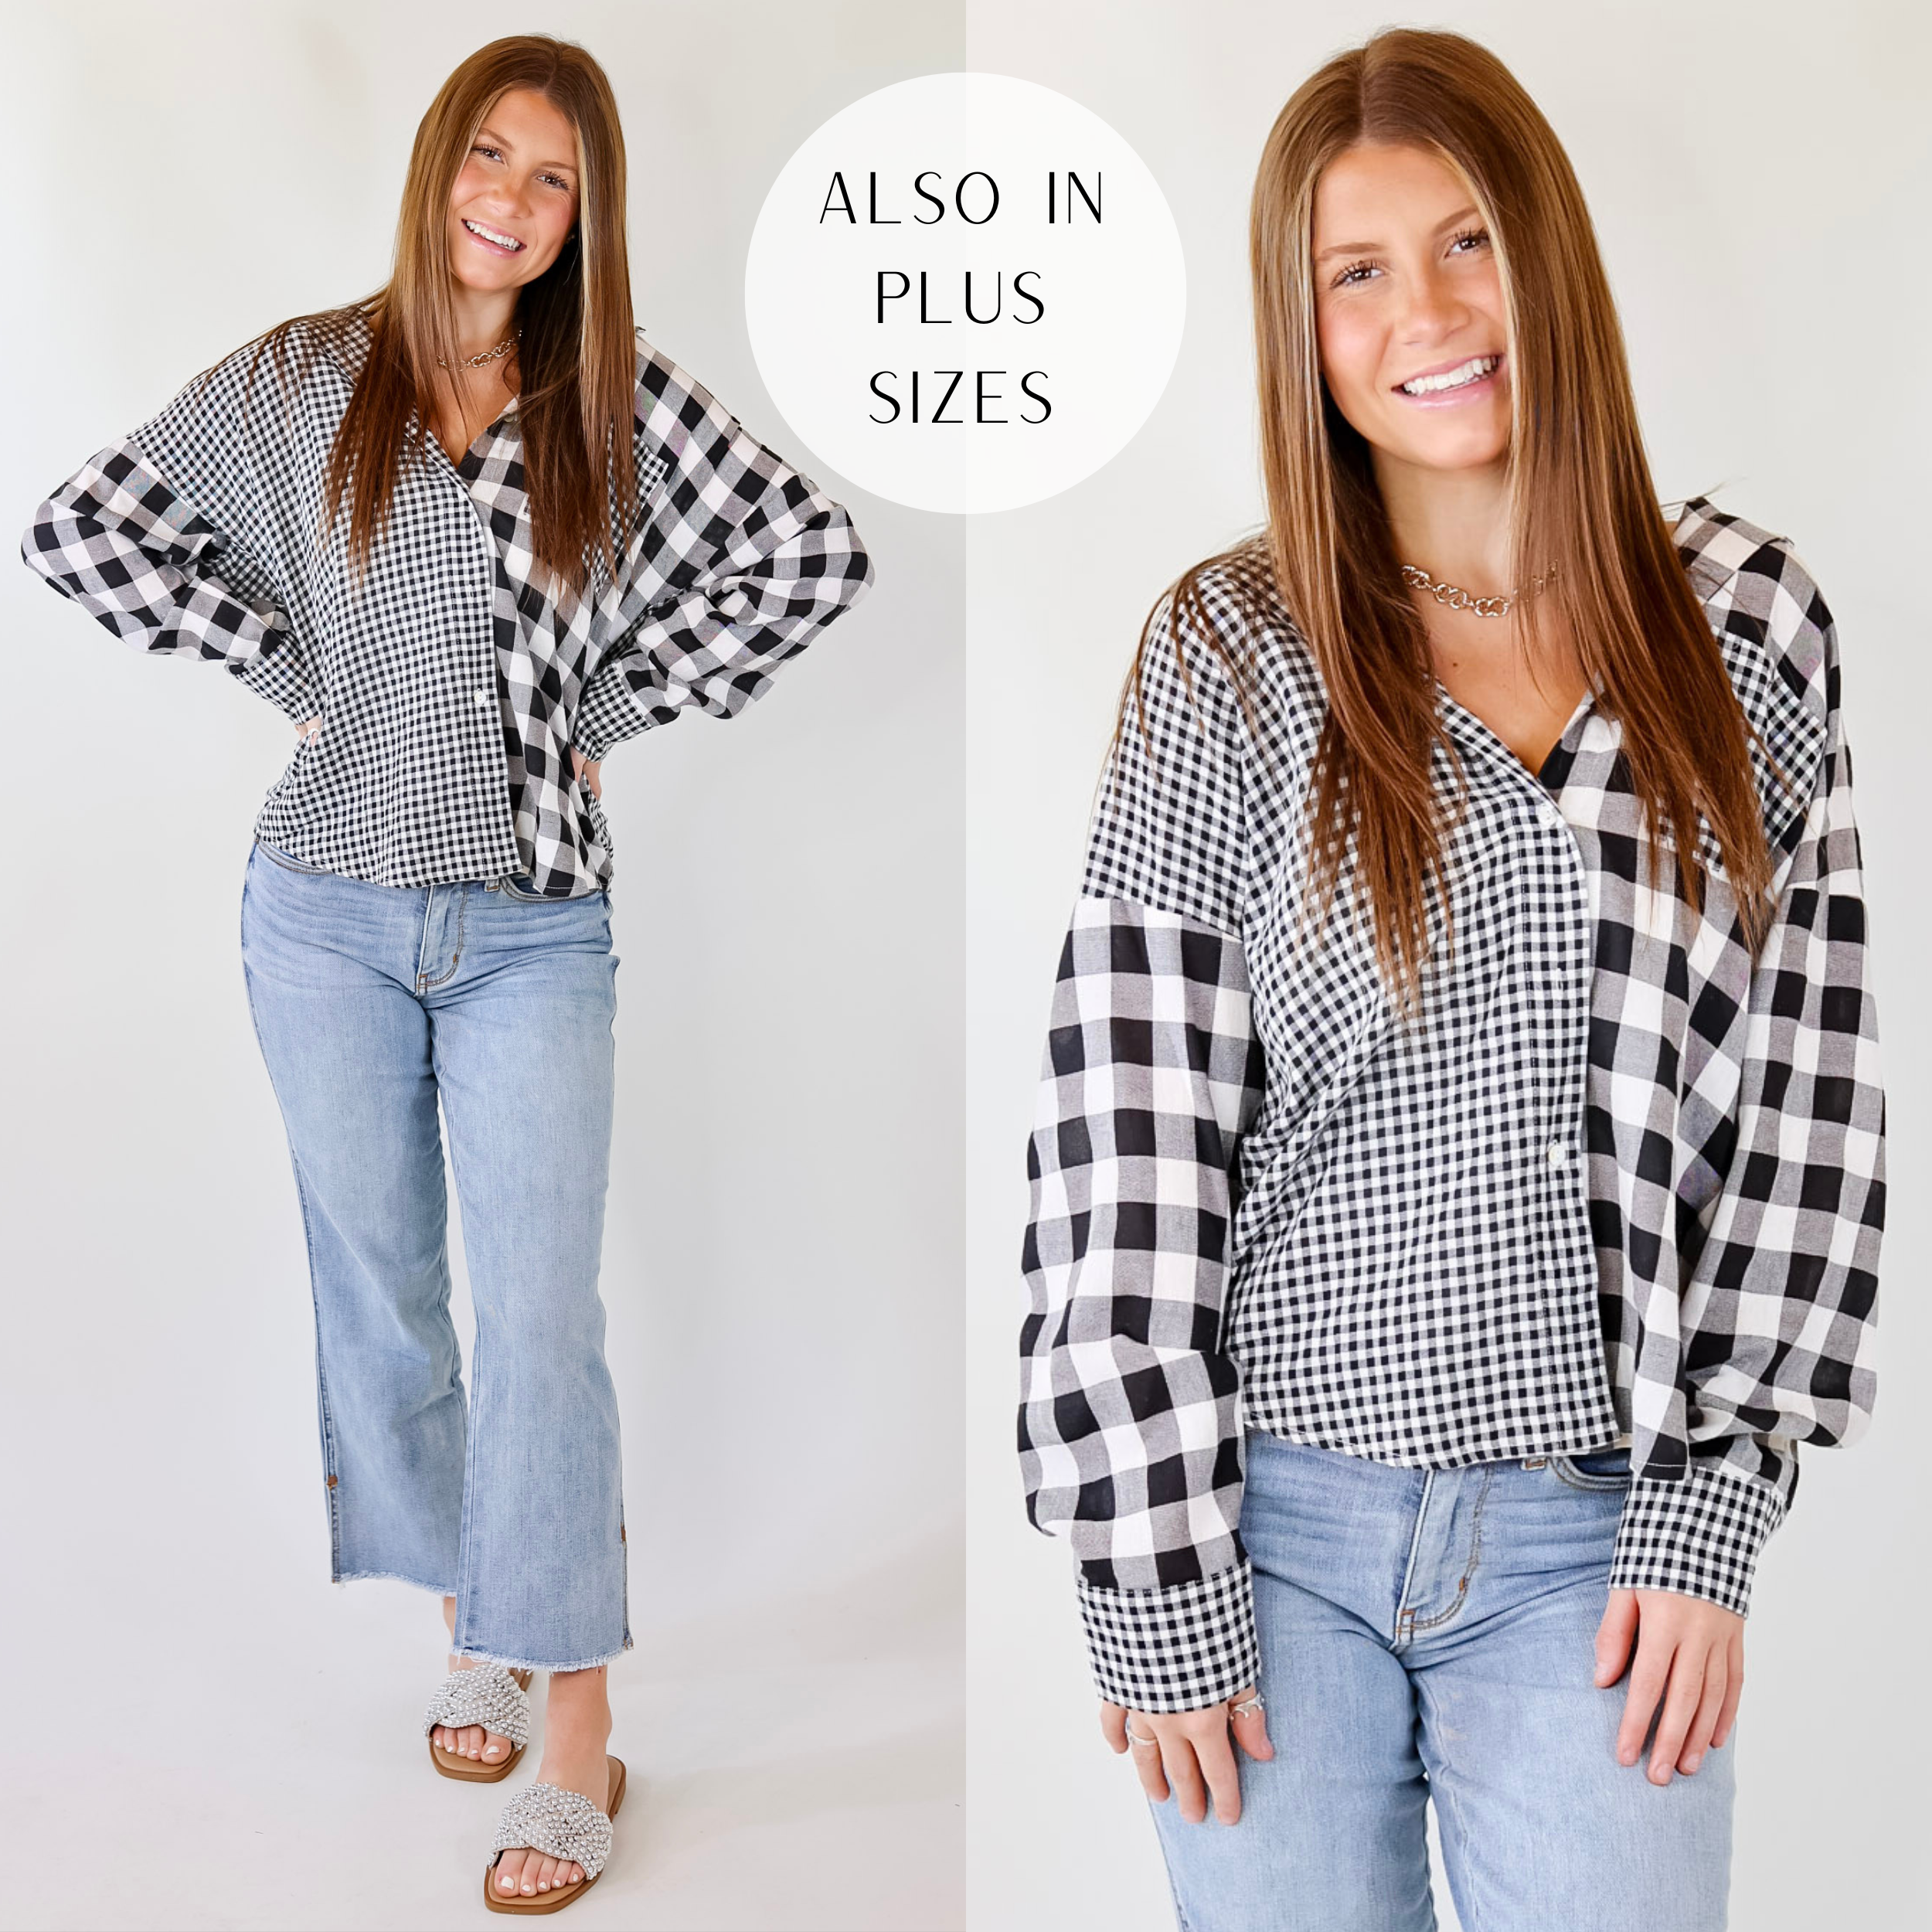 Waiting For You Mix Plaid Button Up Top in Black - Giddy Up Glamour Boutique